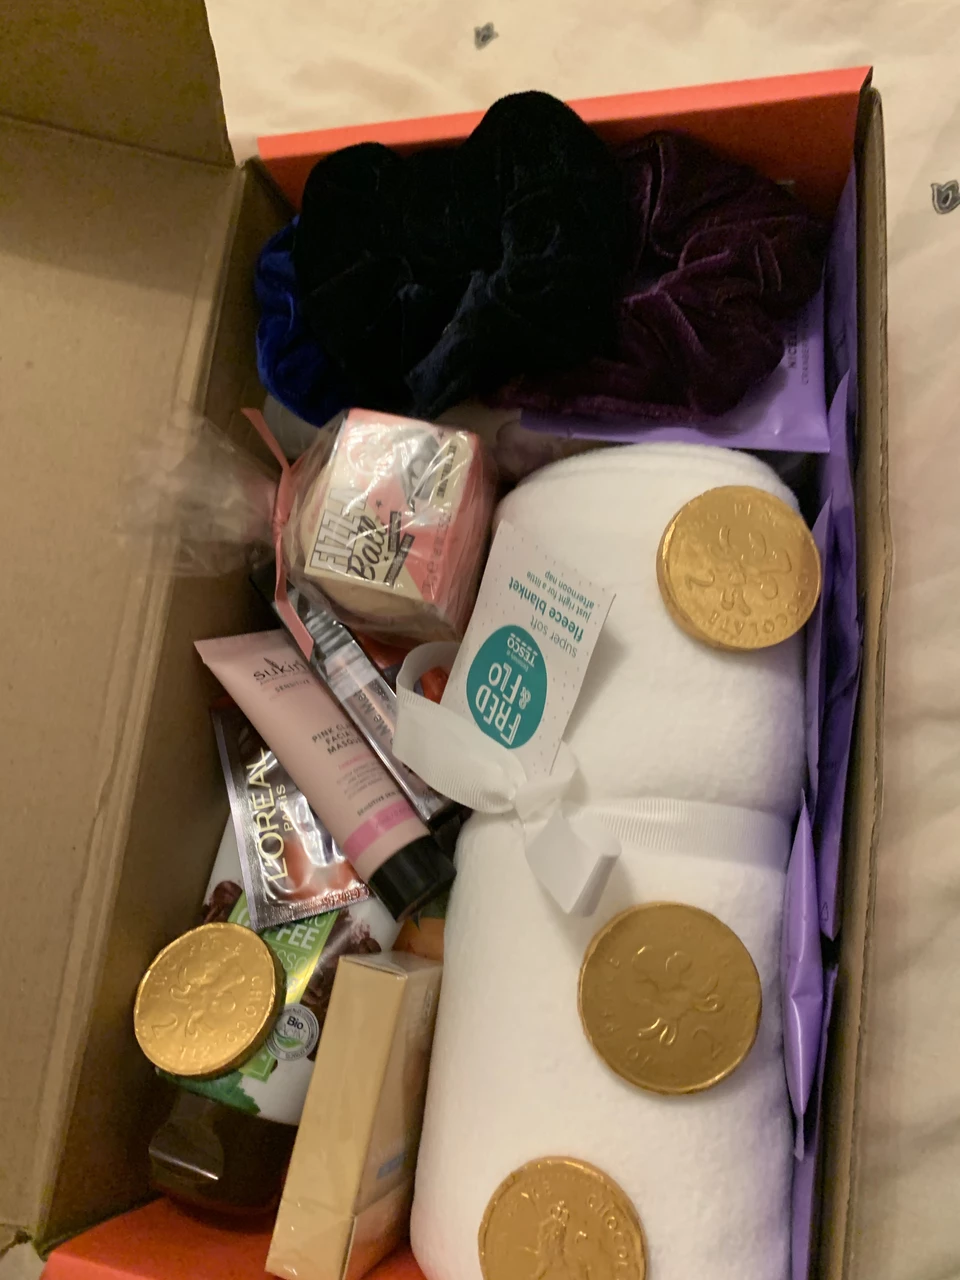 My Santa is a woman box is ready! What have you guys picked in yours?